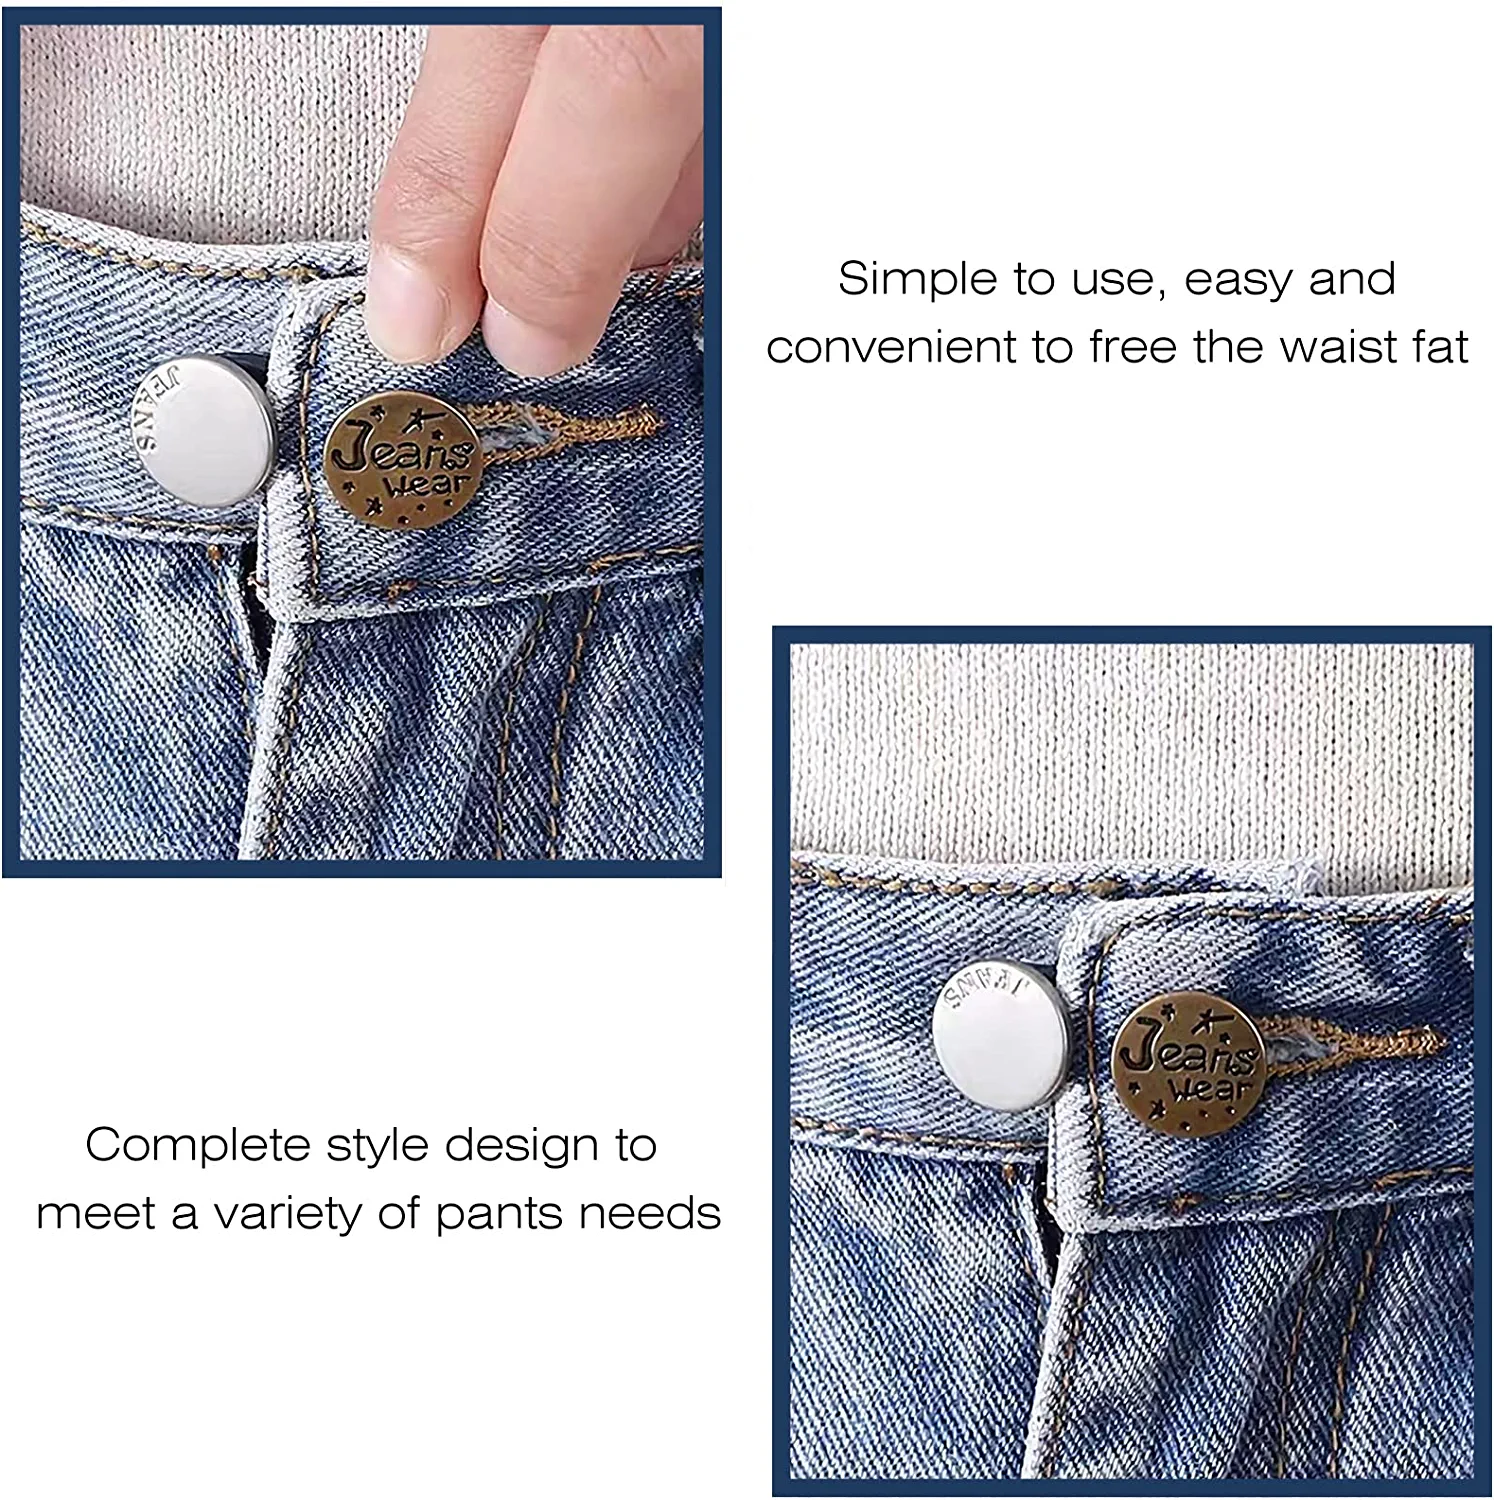 Rubber 15mm/18mm Pants Extender Buttons Flexible Waist Extenders For Loose  Jeans For Men Pants For Women & Men Pregnancy Loose Jeans For Men Skirt  From Kevin13, $0.15